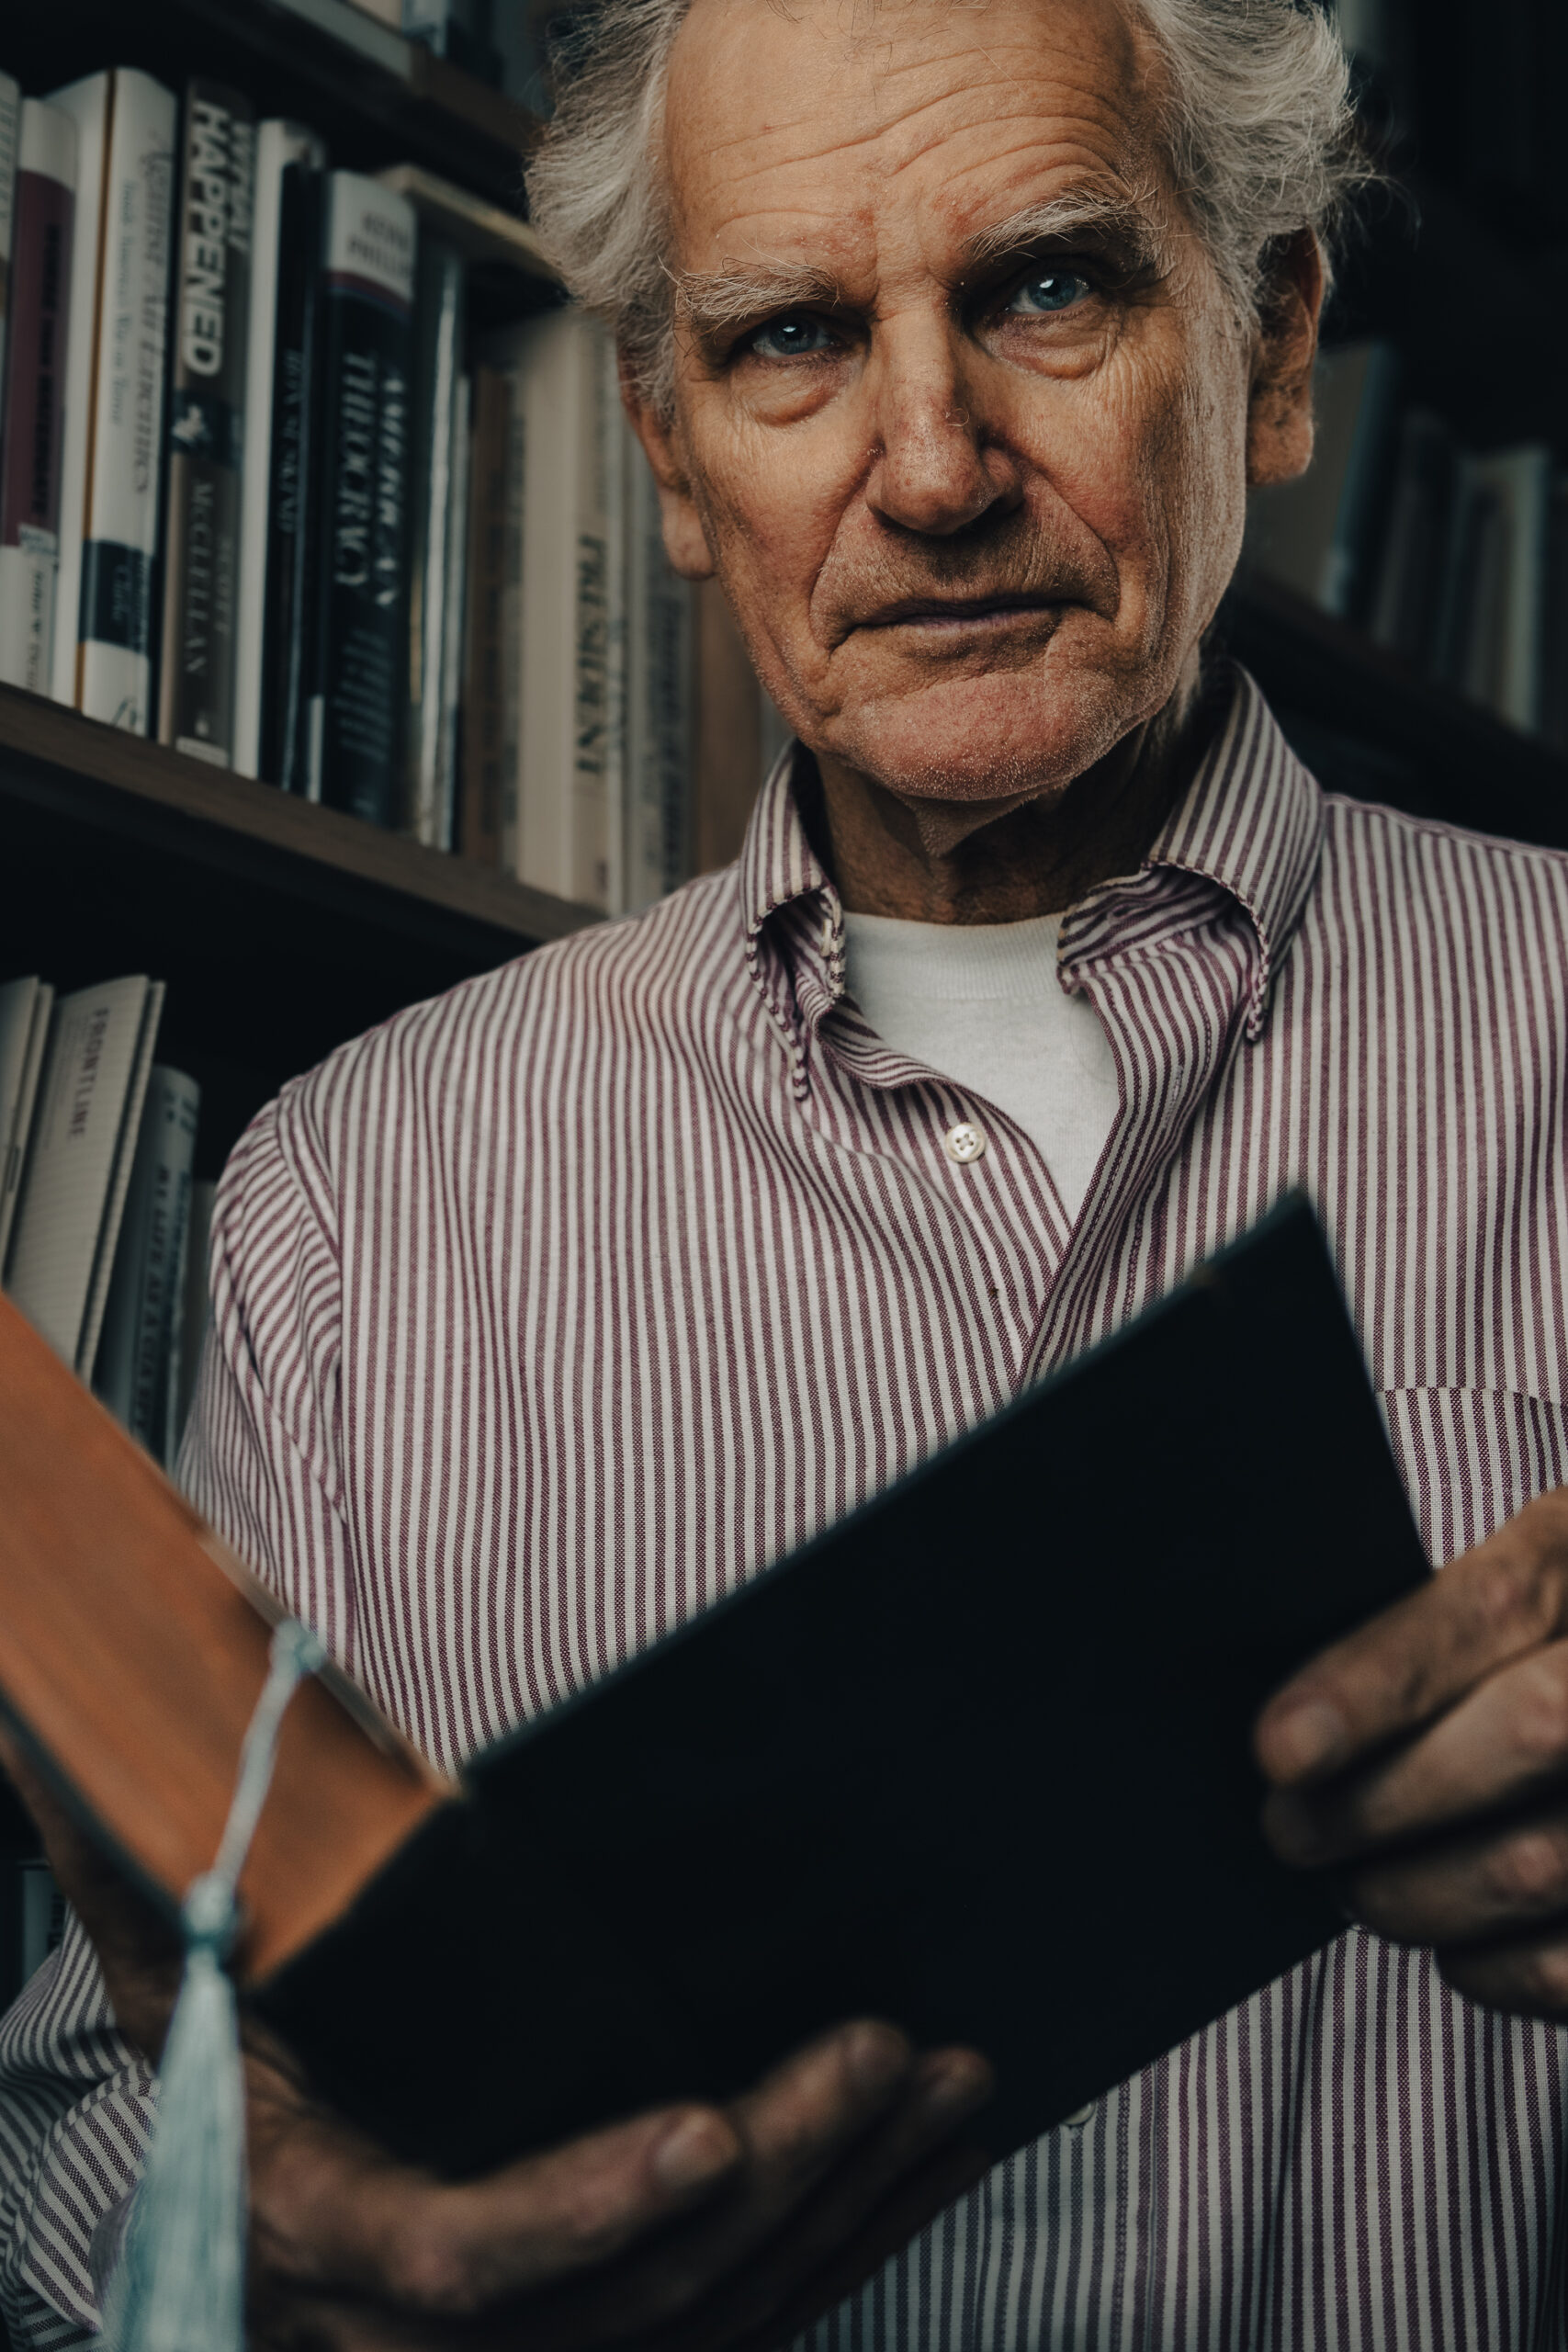 Close up shot of older man in light colored collared shirt standing in front of a library shelf looks up from his book.